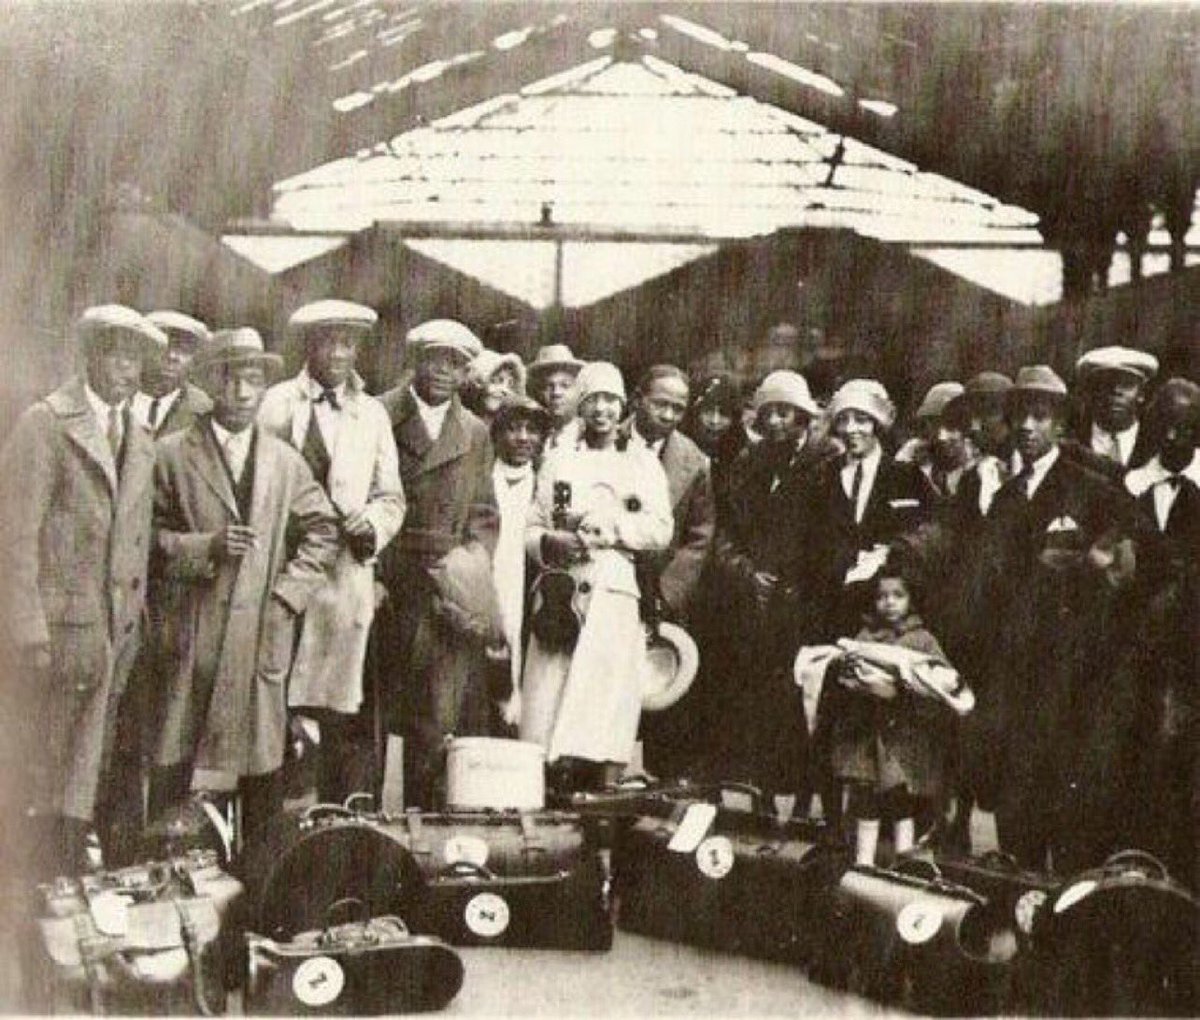 On September16 th 1925 the cast of “ La Revue Nègre “sails for France on the RMS Berengaria . This is a very rare photo of the Company arrival  September 22 at the port of Cherbourg .You can see glamorous Josephine Baker in the center “A Star is Born “and the rest is HERstory …